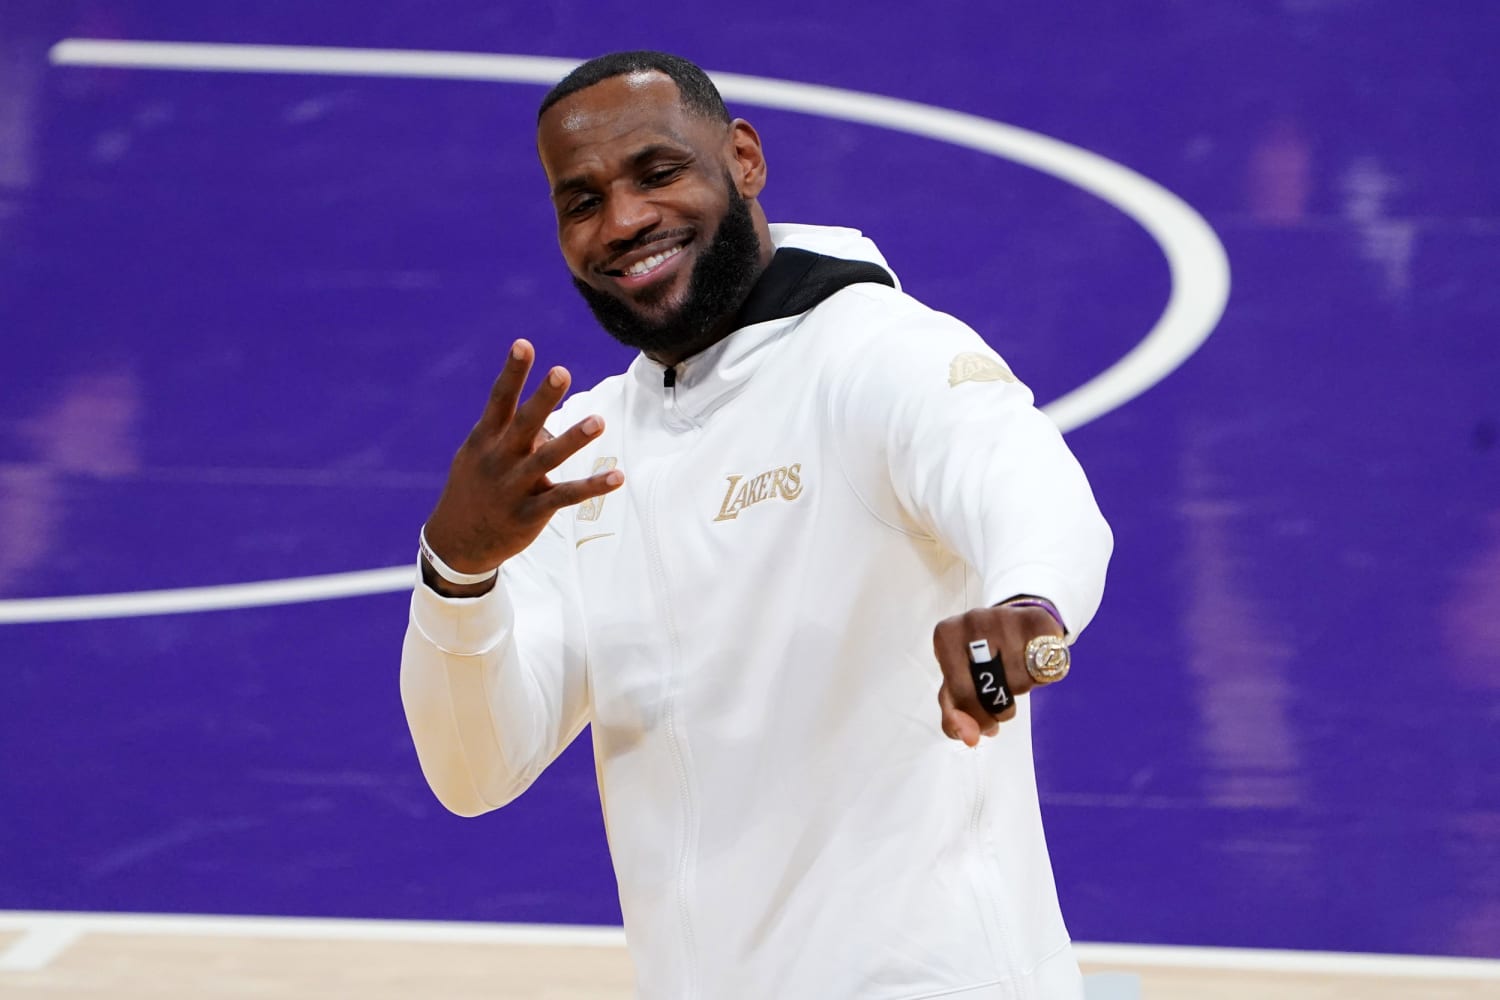 LeBron James, Poll: Who's the Most Influential Millennial?